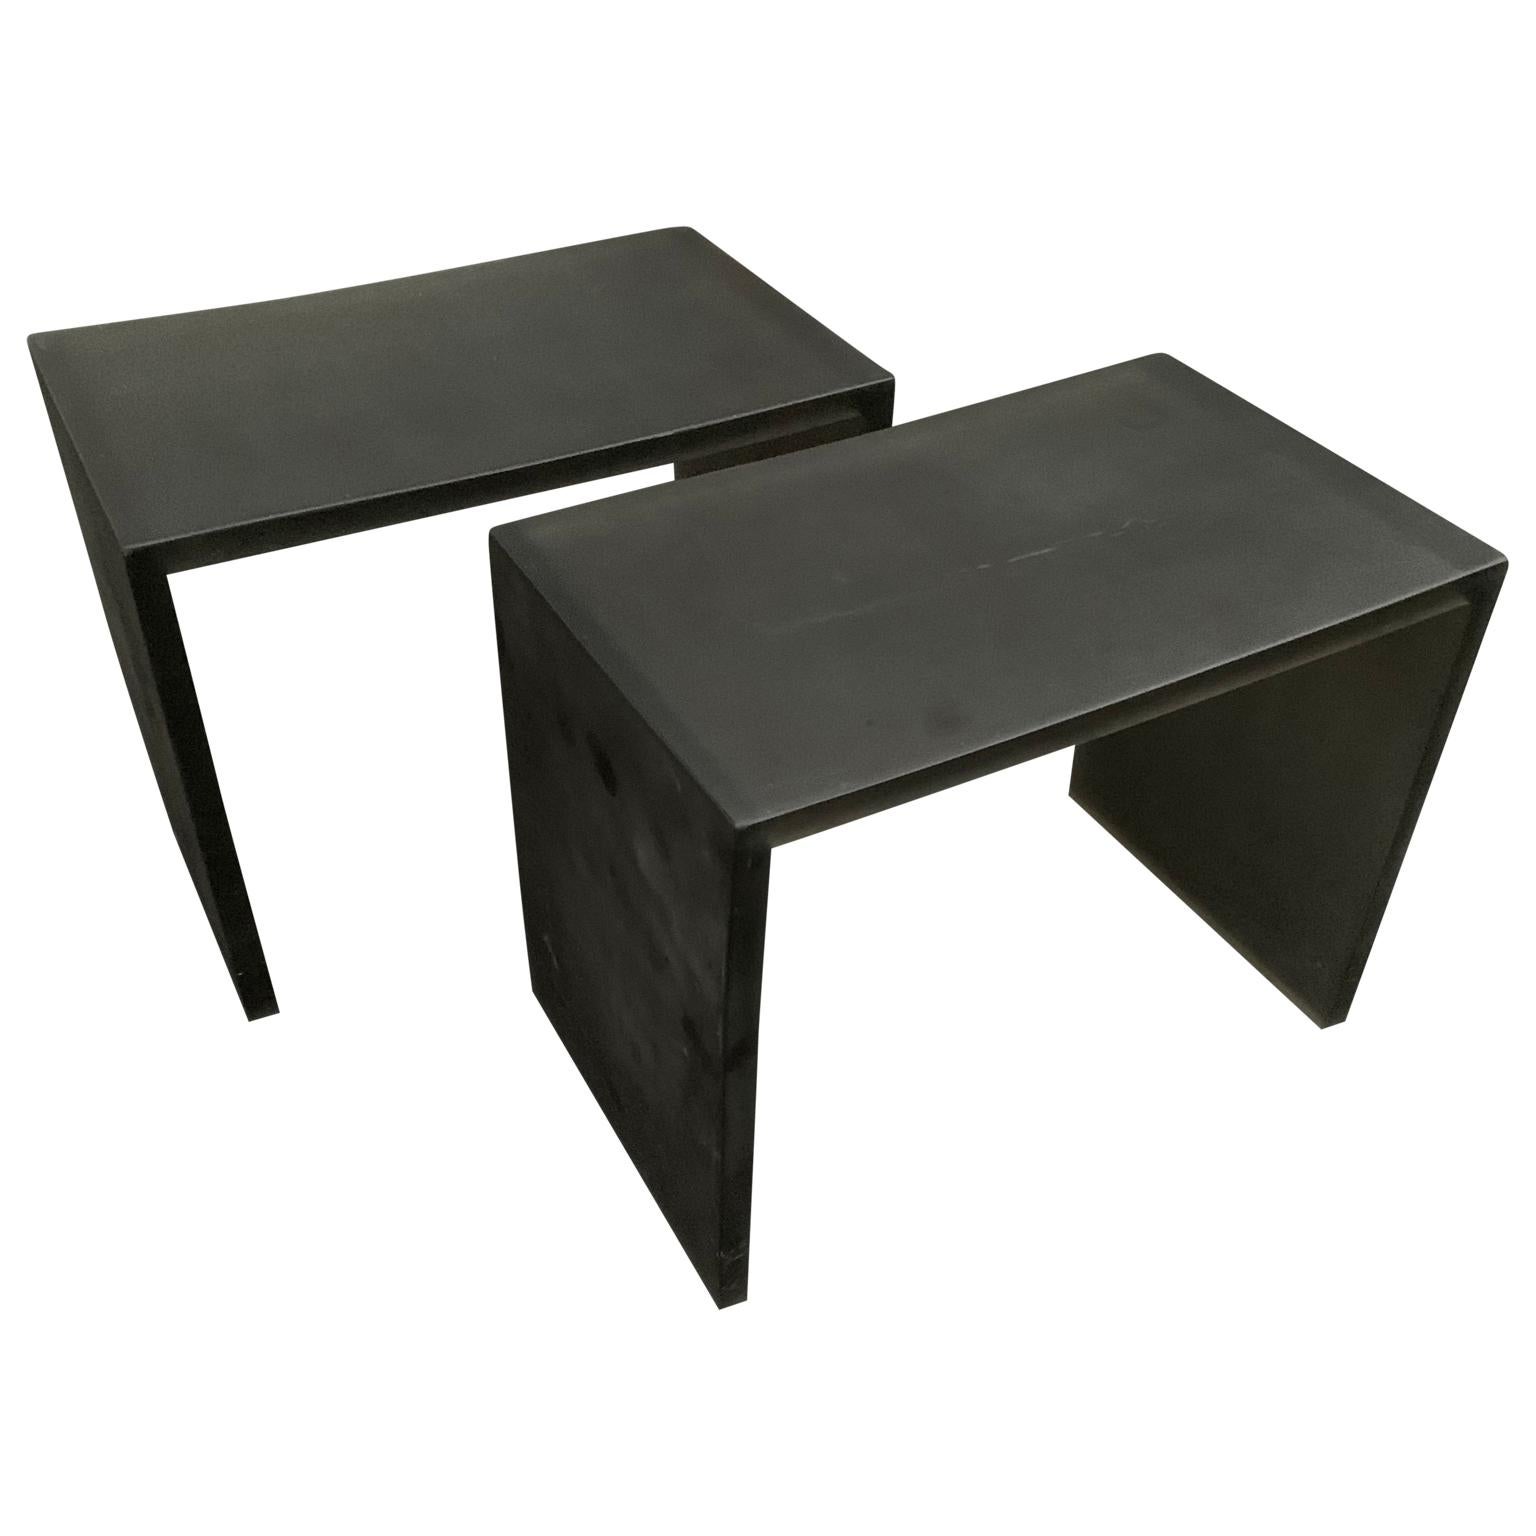 Pair of Mid-Century Modern Black Frosted Lucite Side Tables or Benches 2